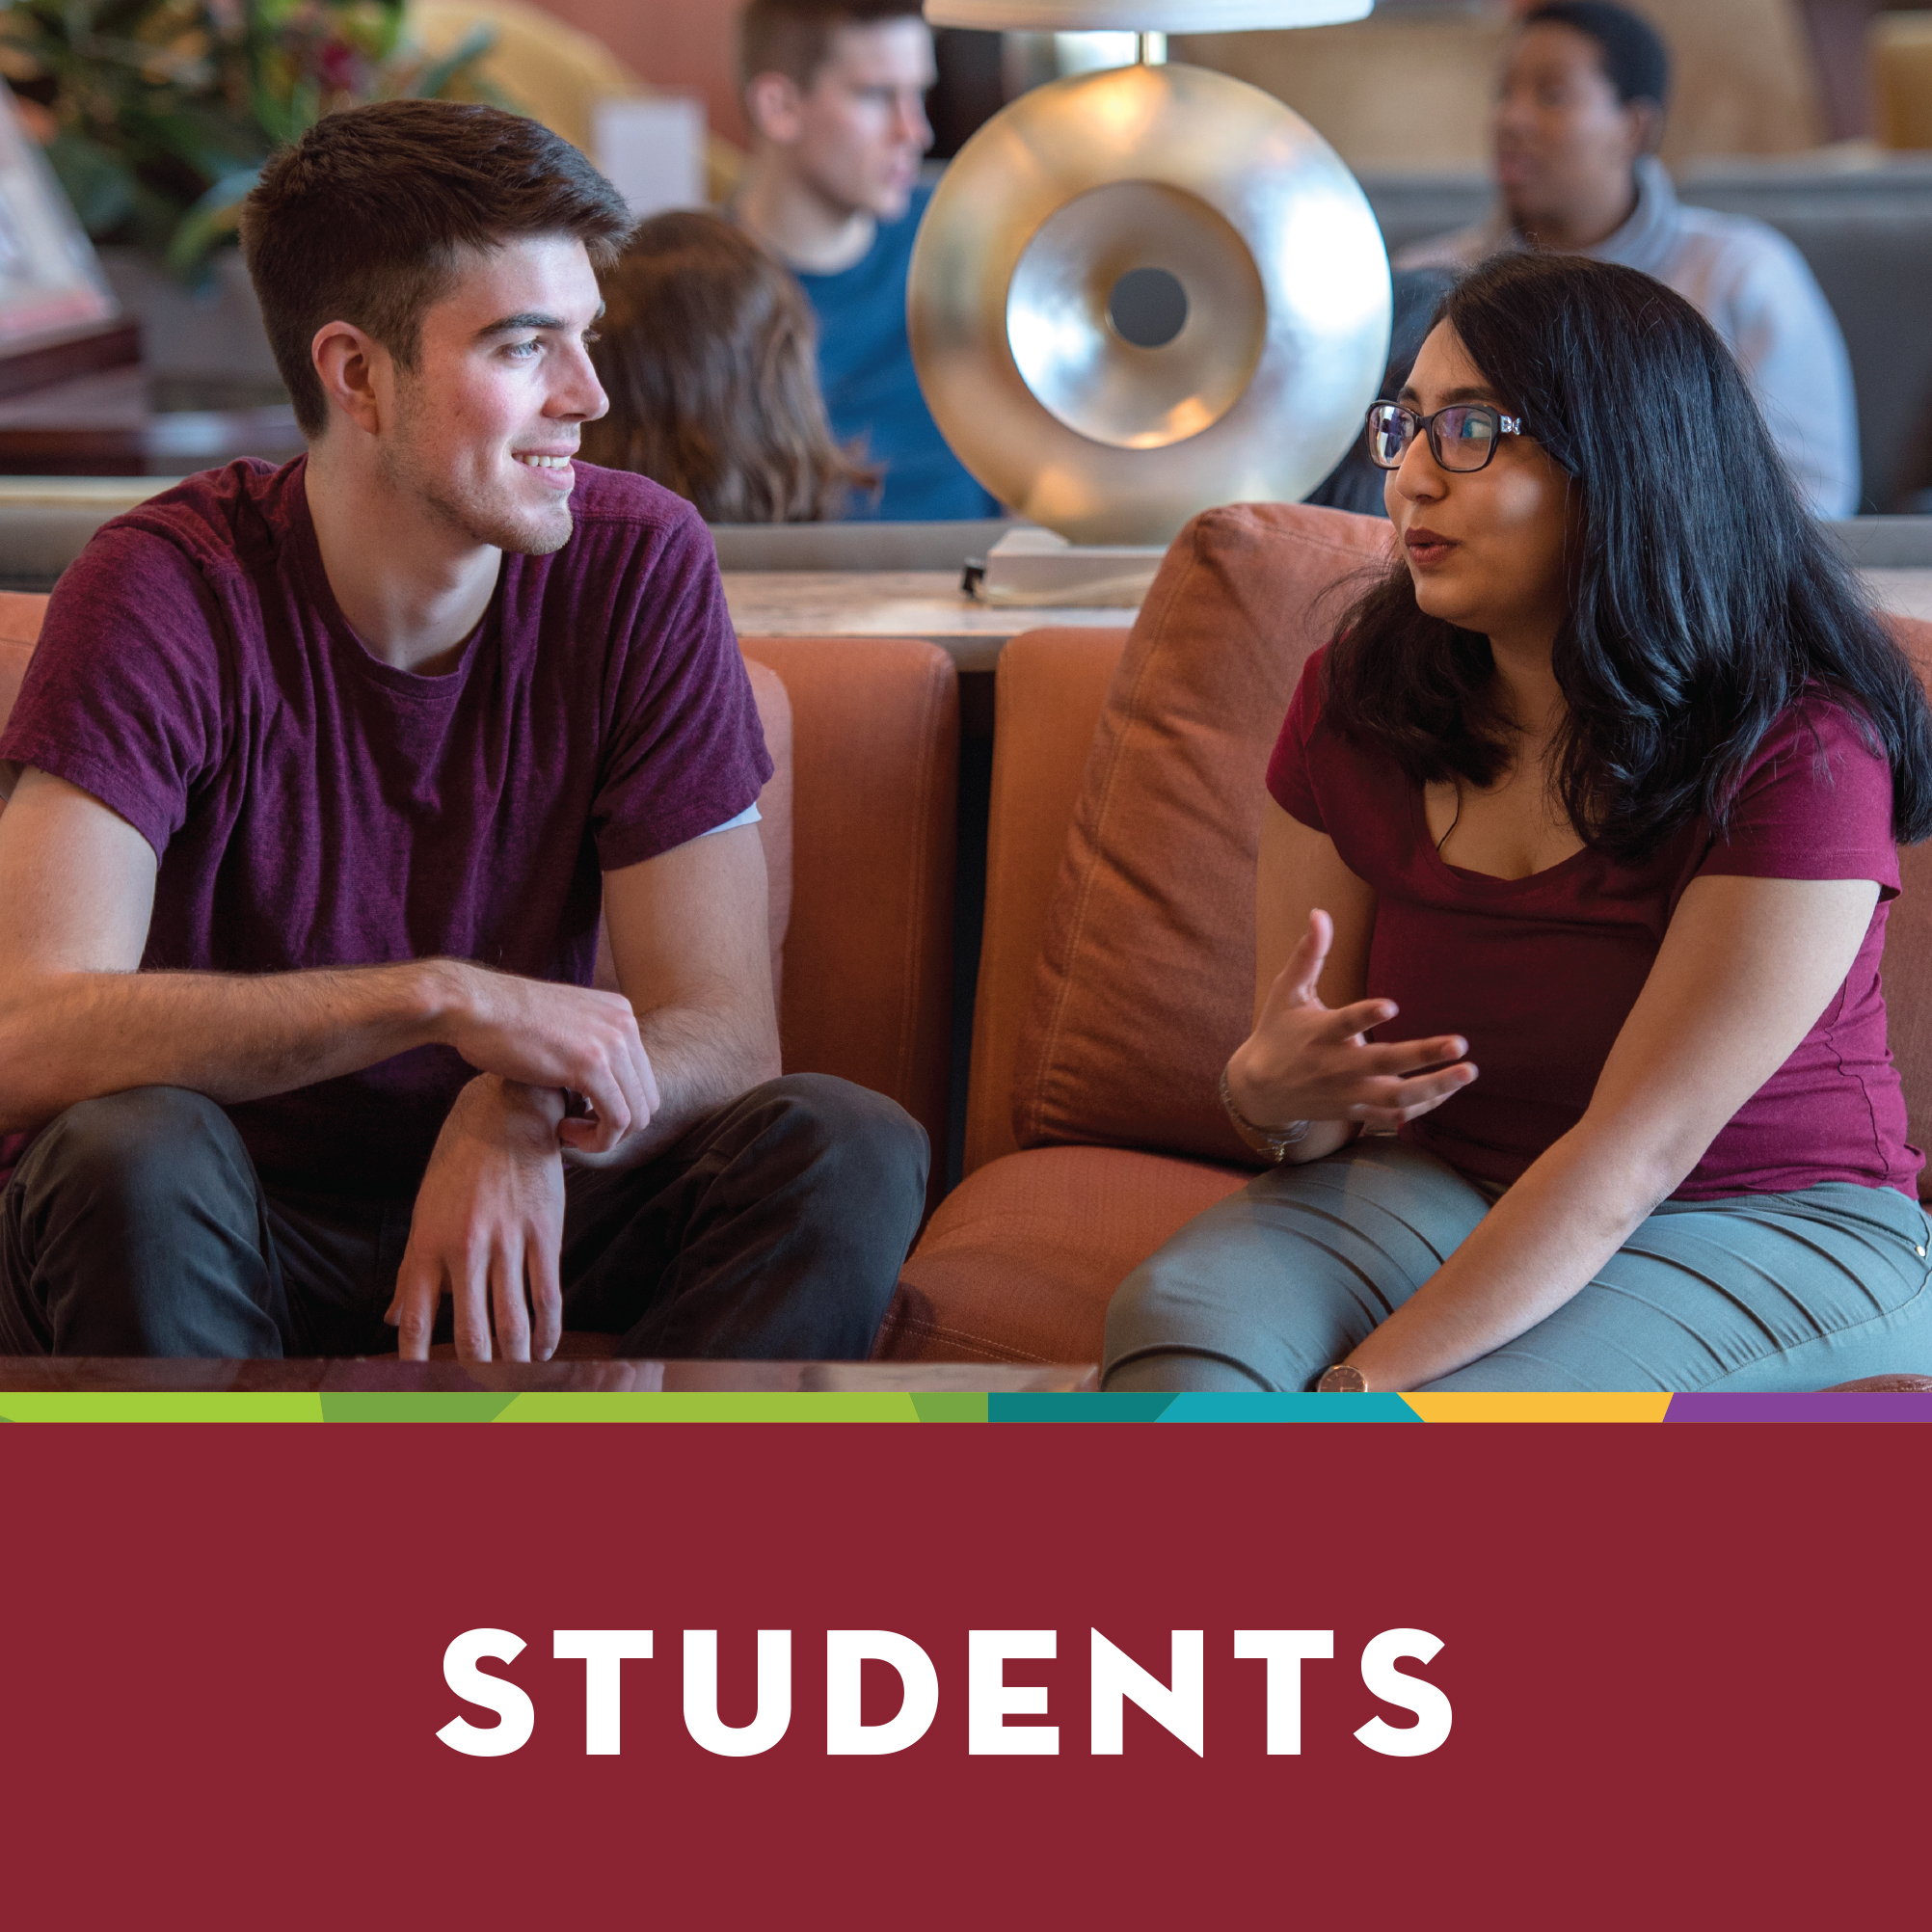 Image of students speaking to each other, text box says Students